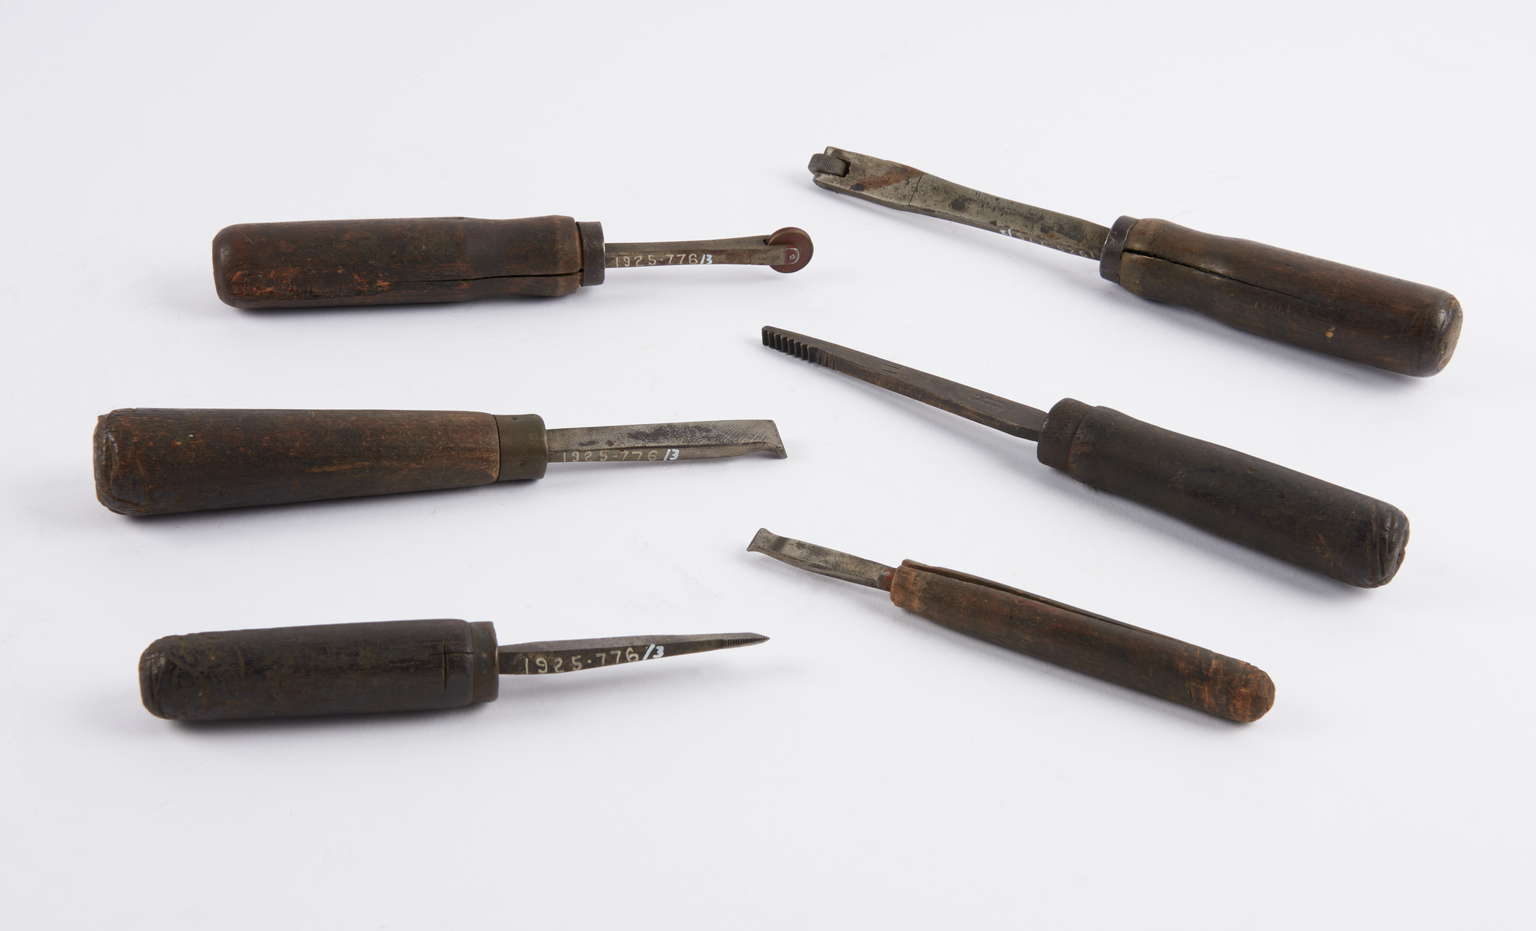 Eight eighteenth century hand tools, including 5 inside chassers, 1 inside cleaning tool, 1 knurling tool and 1 roller burnishing tool.